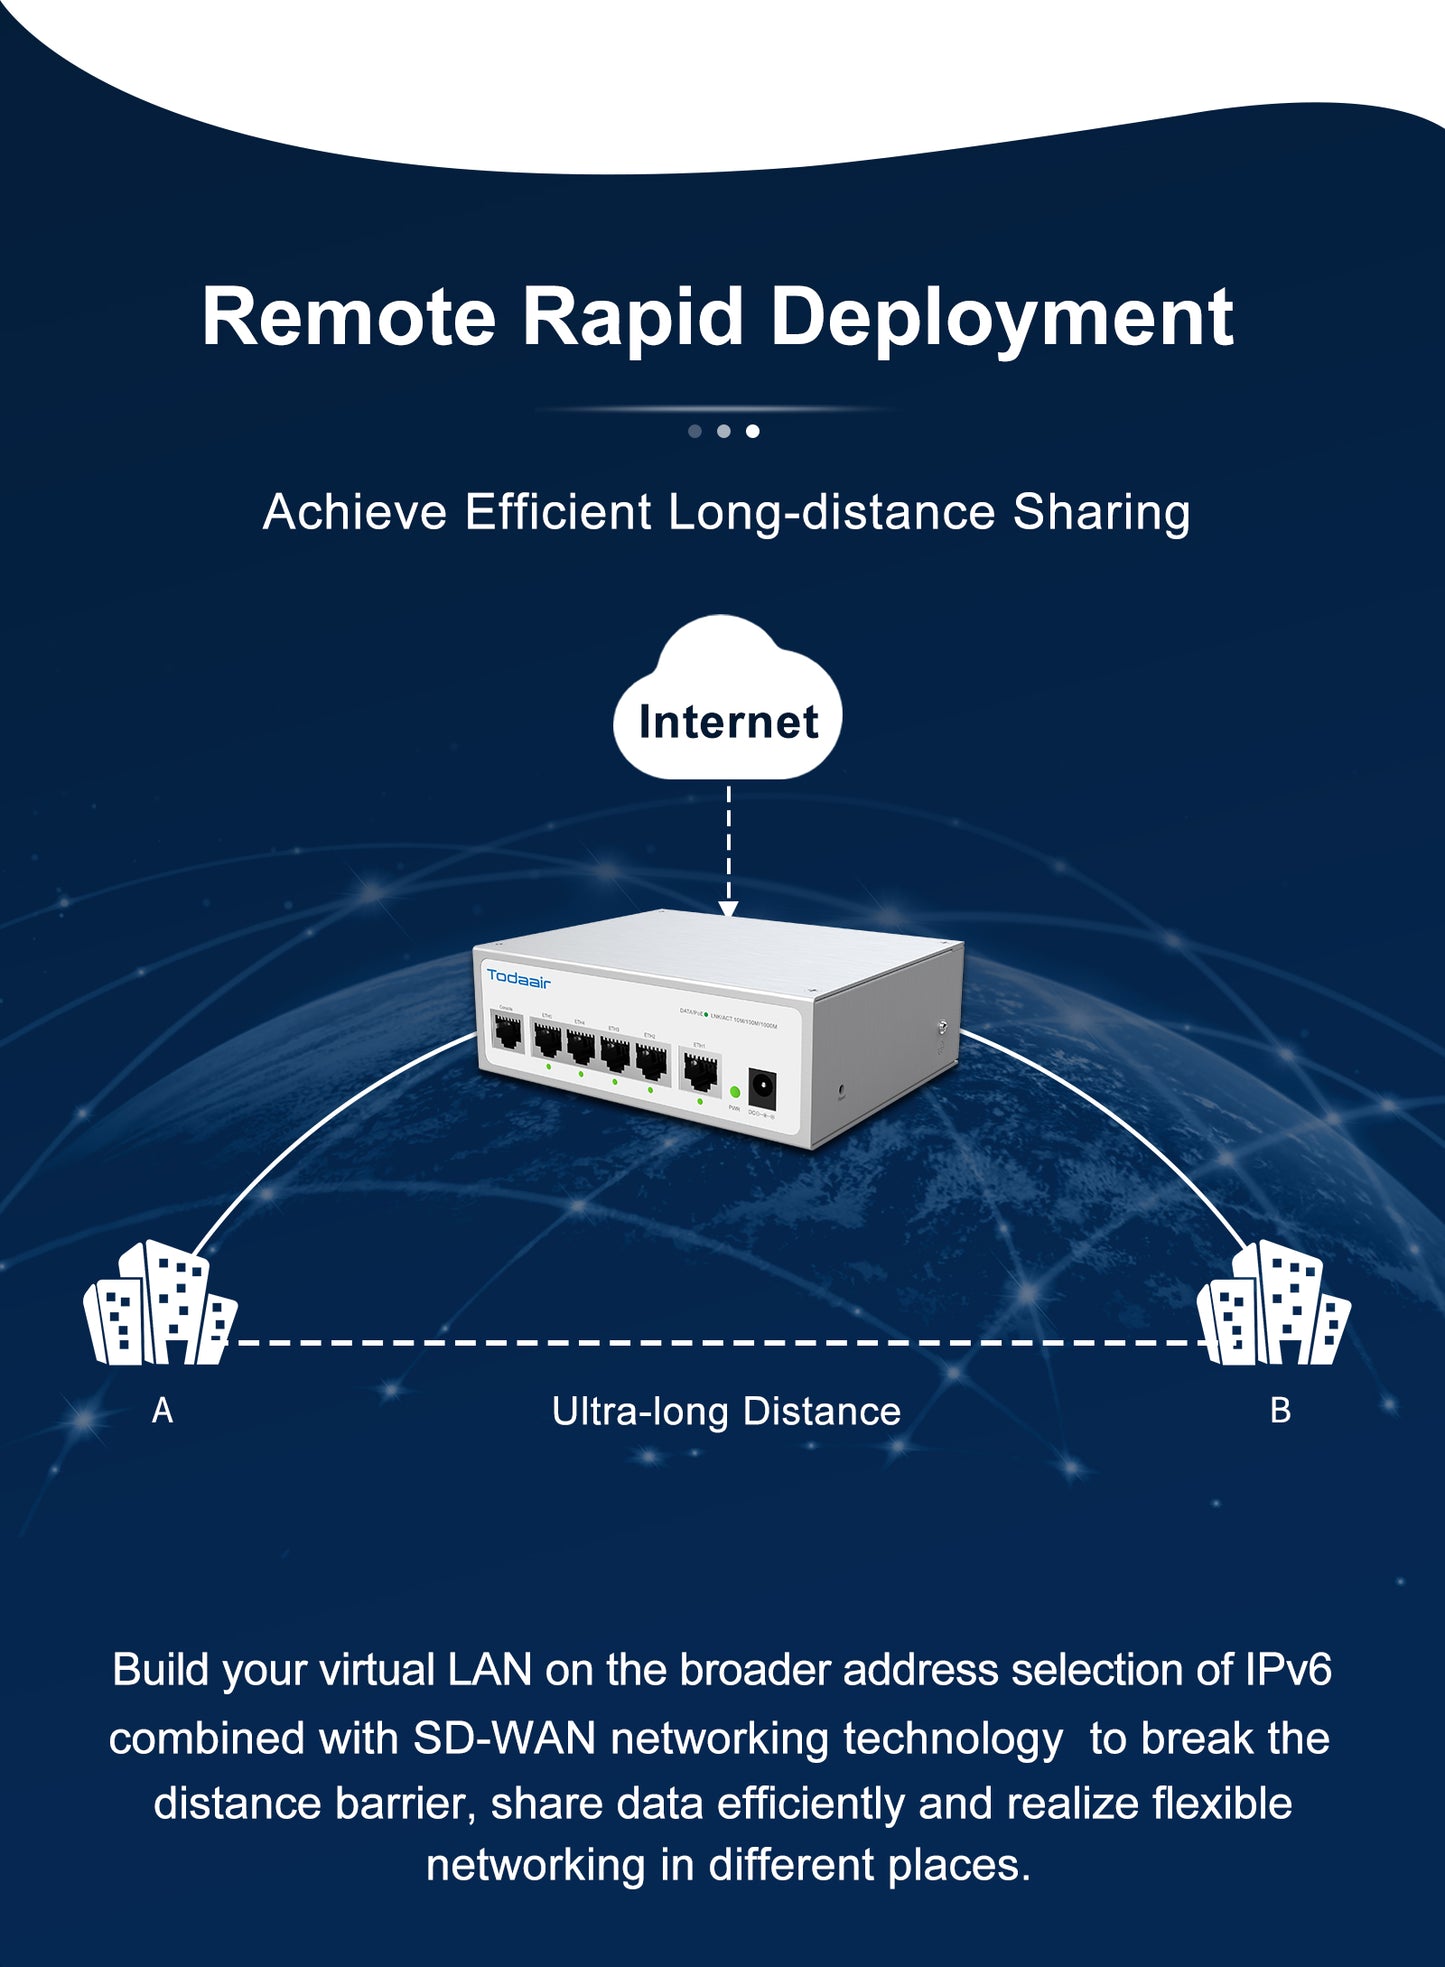 remote rapid deployment，long distance sharing